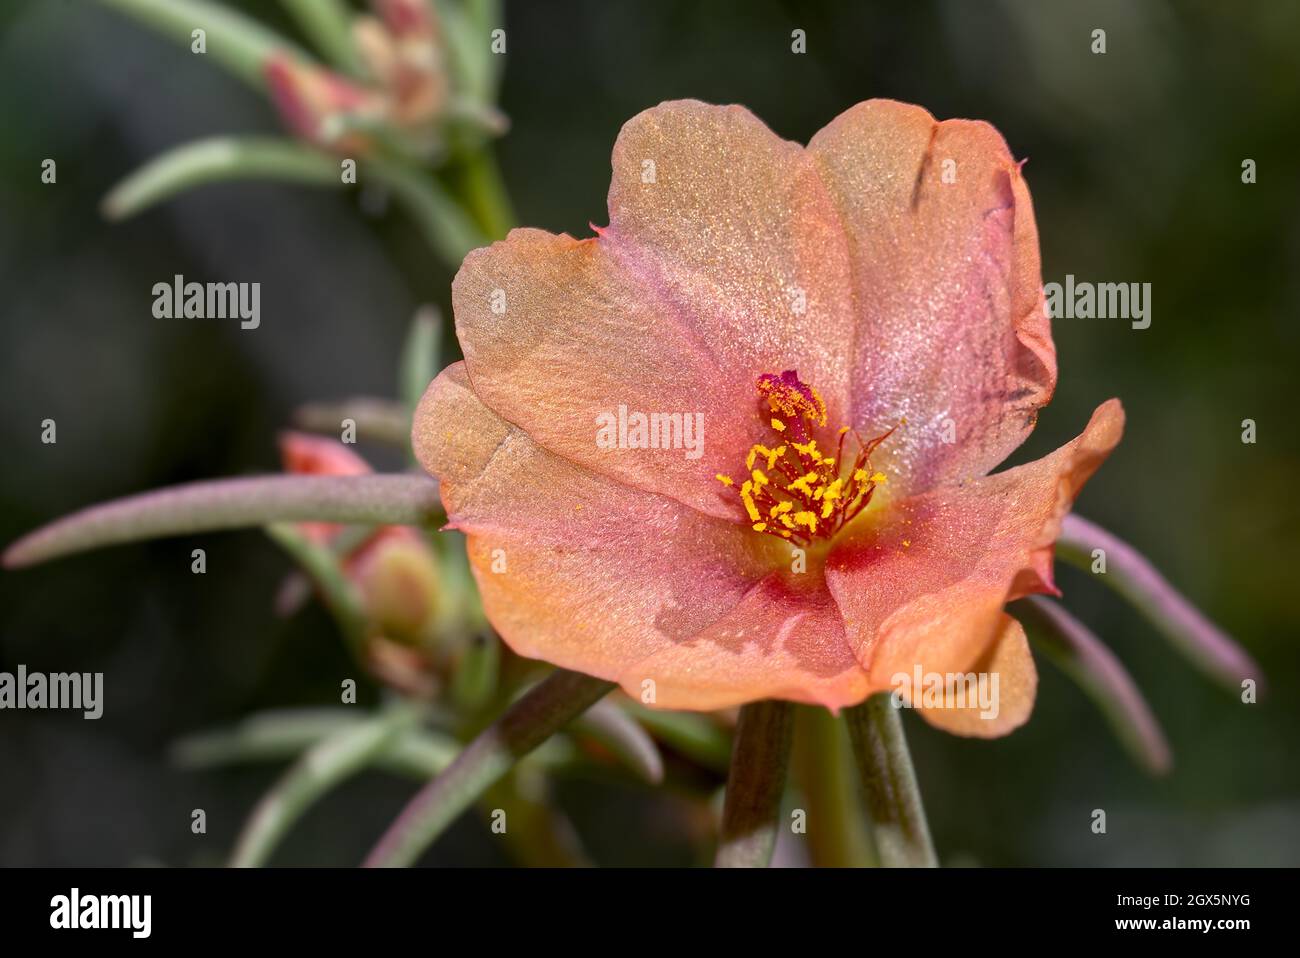 Flower of the Shrubby Purslane, species Portulaca Suffrutescens. This one is native to Arizona. Stock Photo